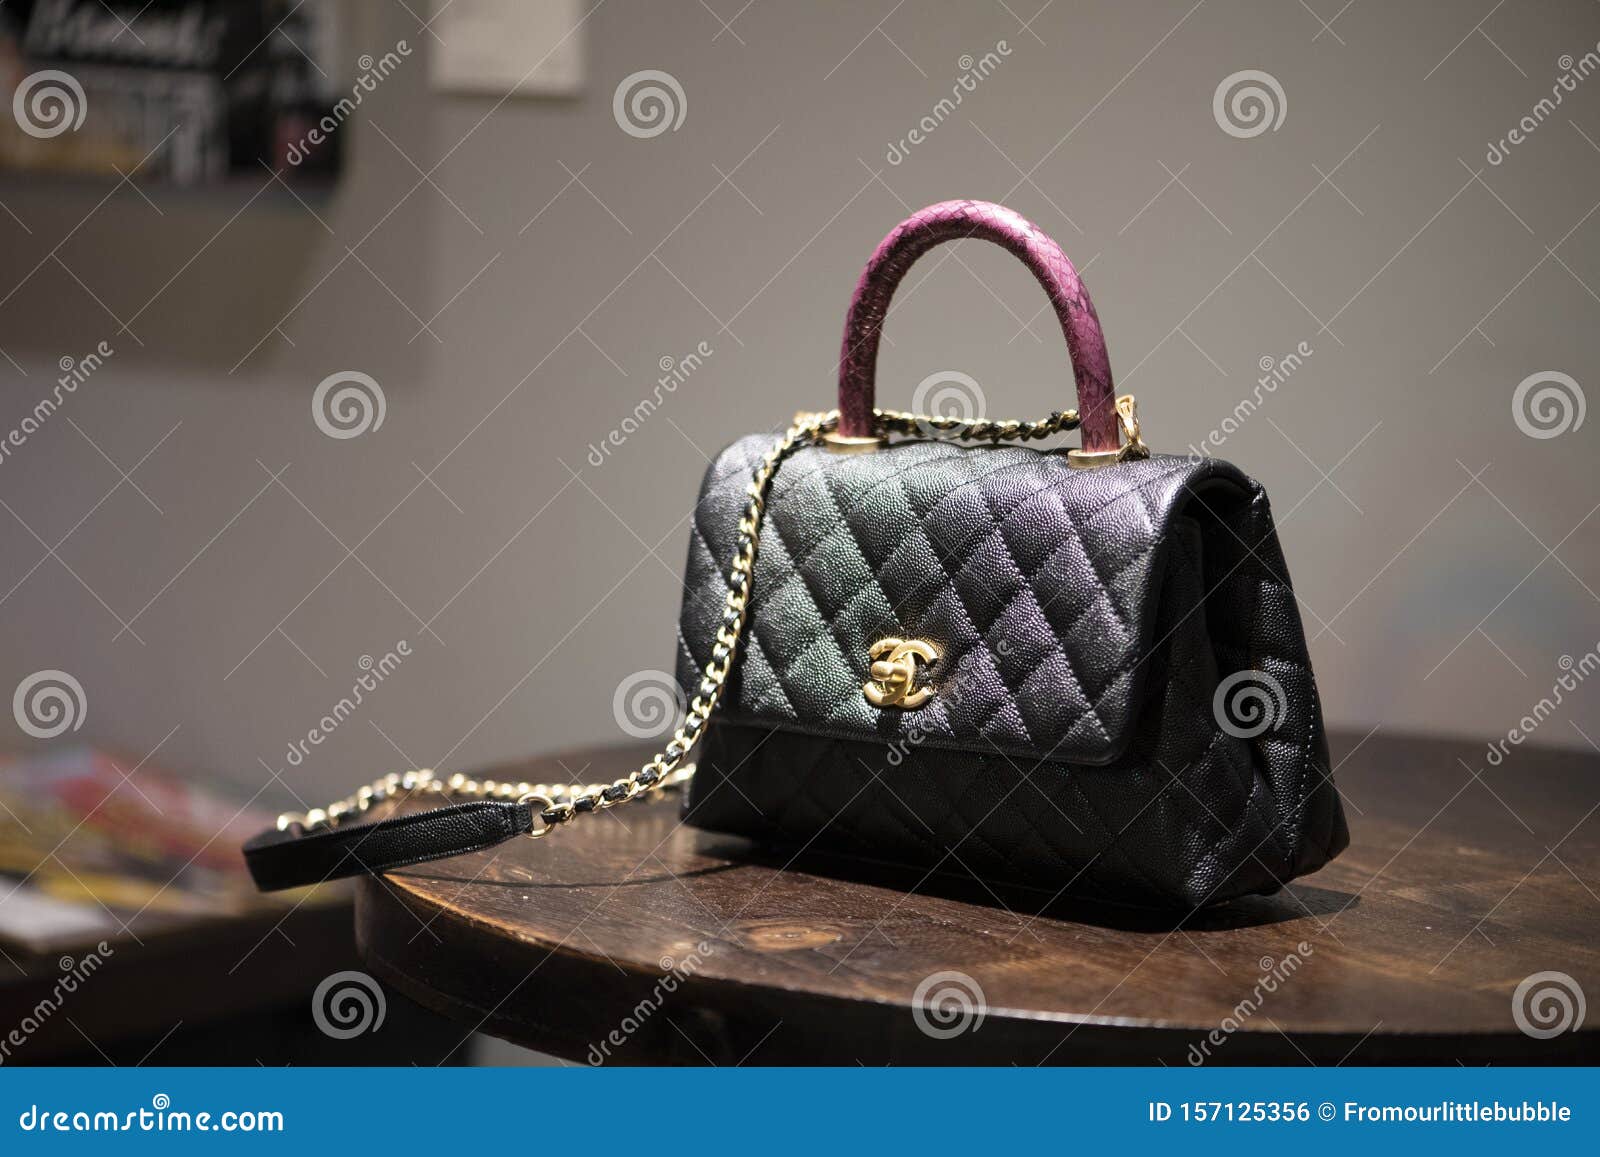 Limited Edition Chanel Bag on a Table Editorial Photo - Image of